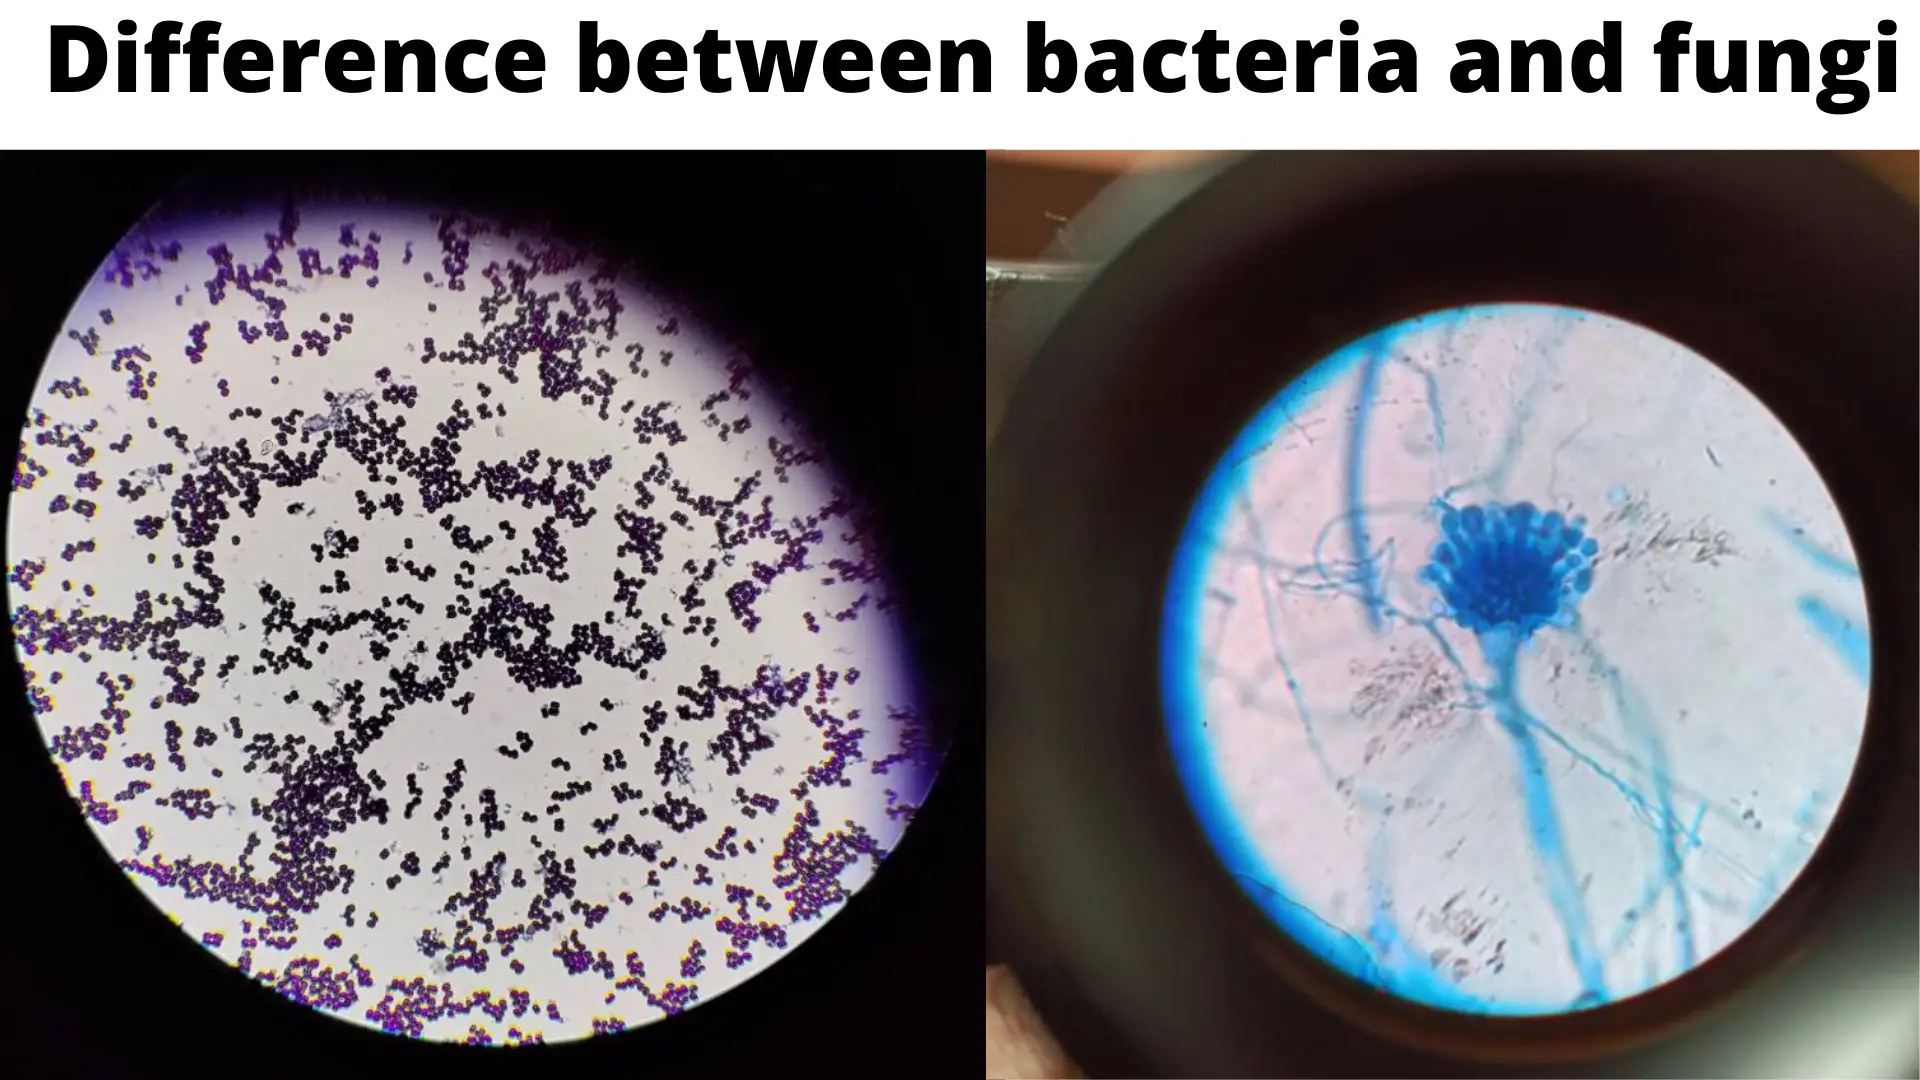 Differences and Similarities Between Bacteria and Fungi